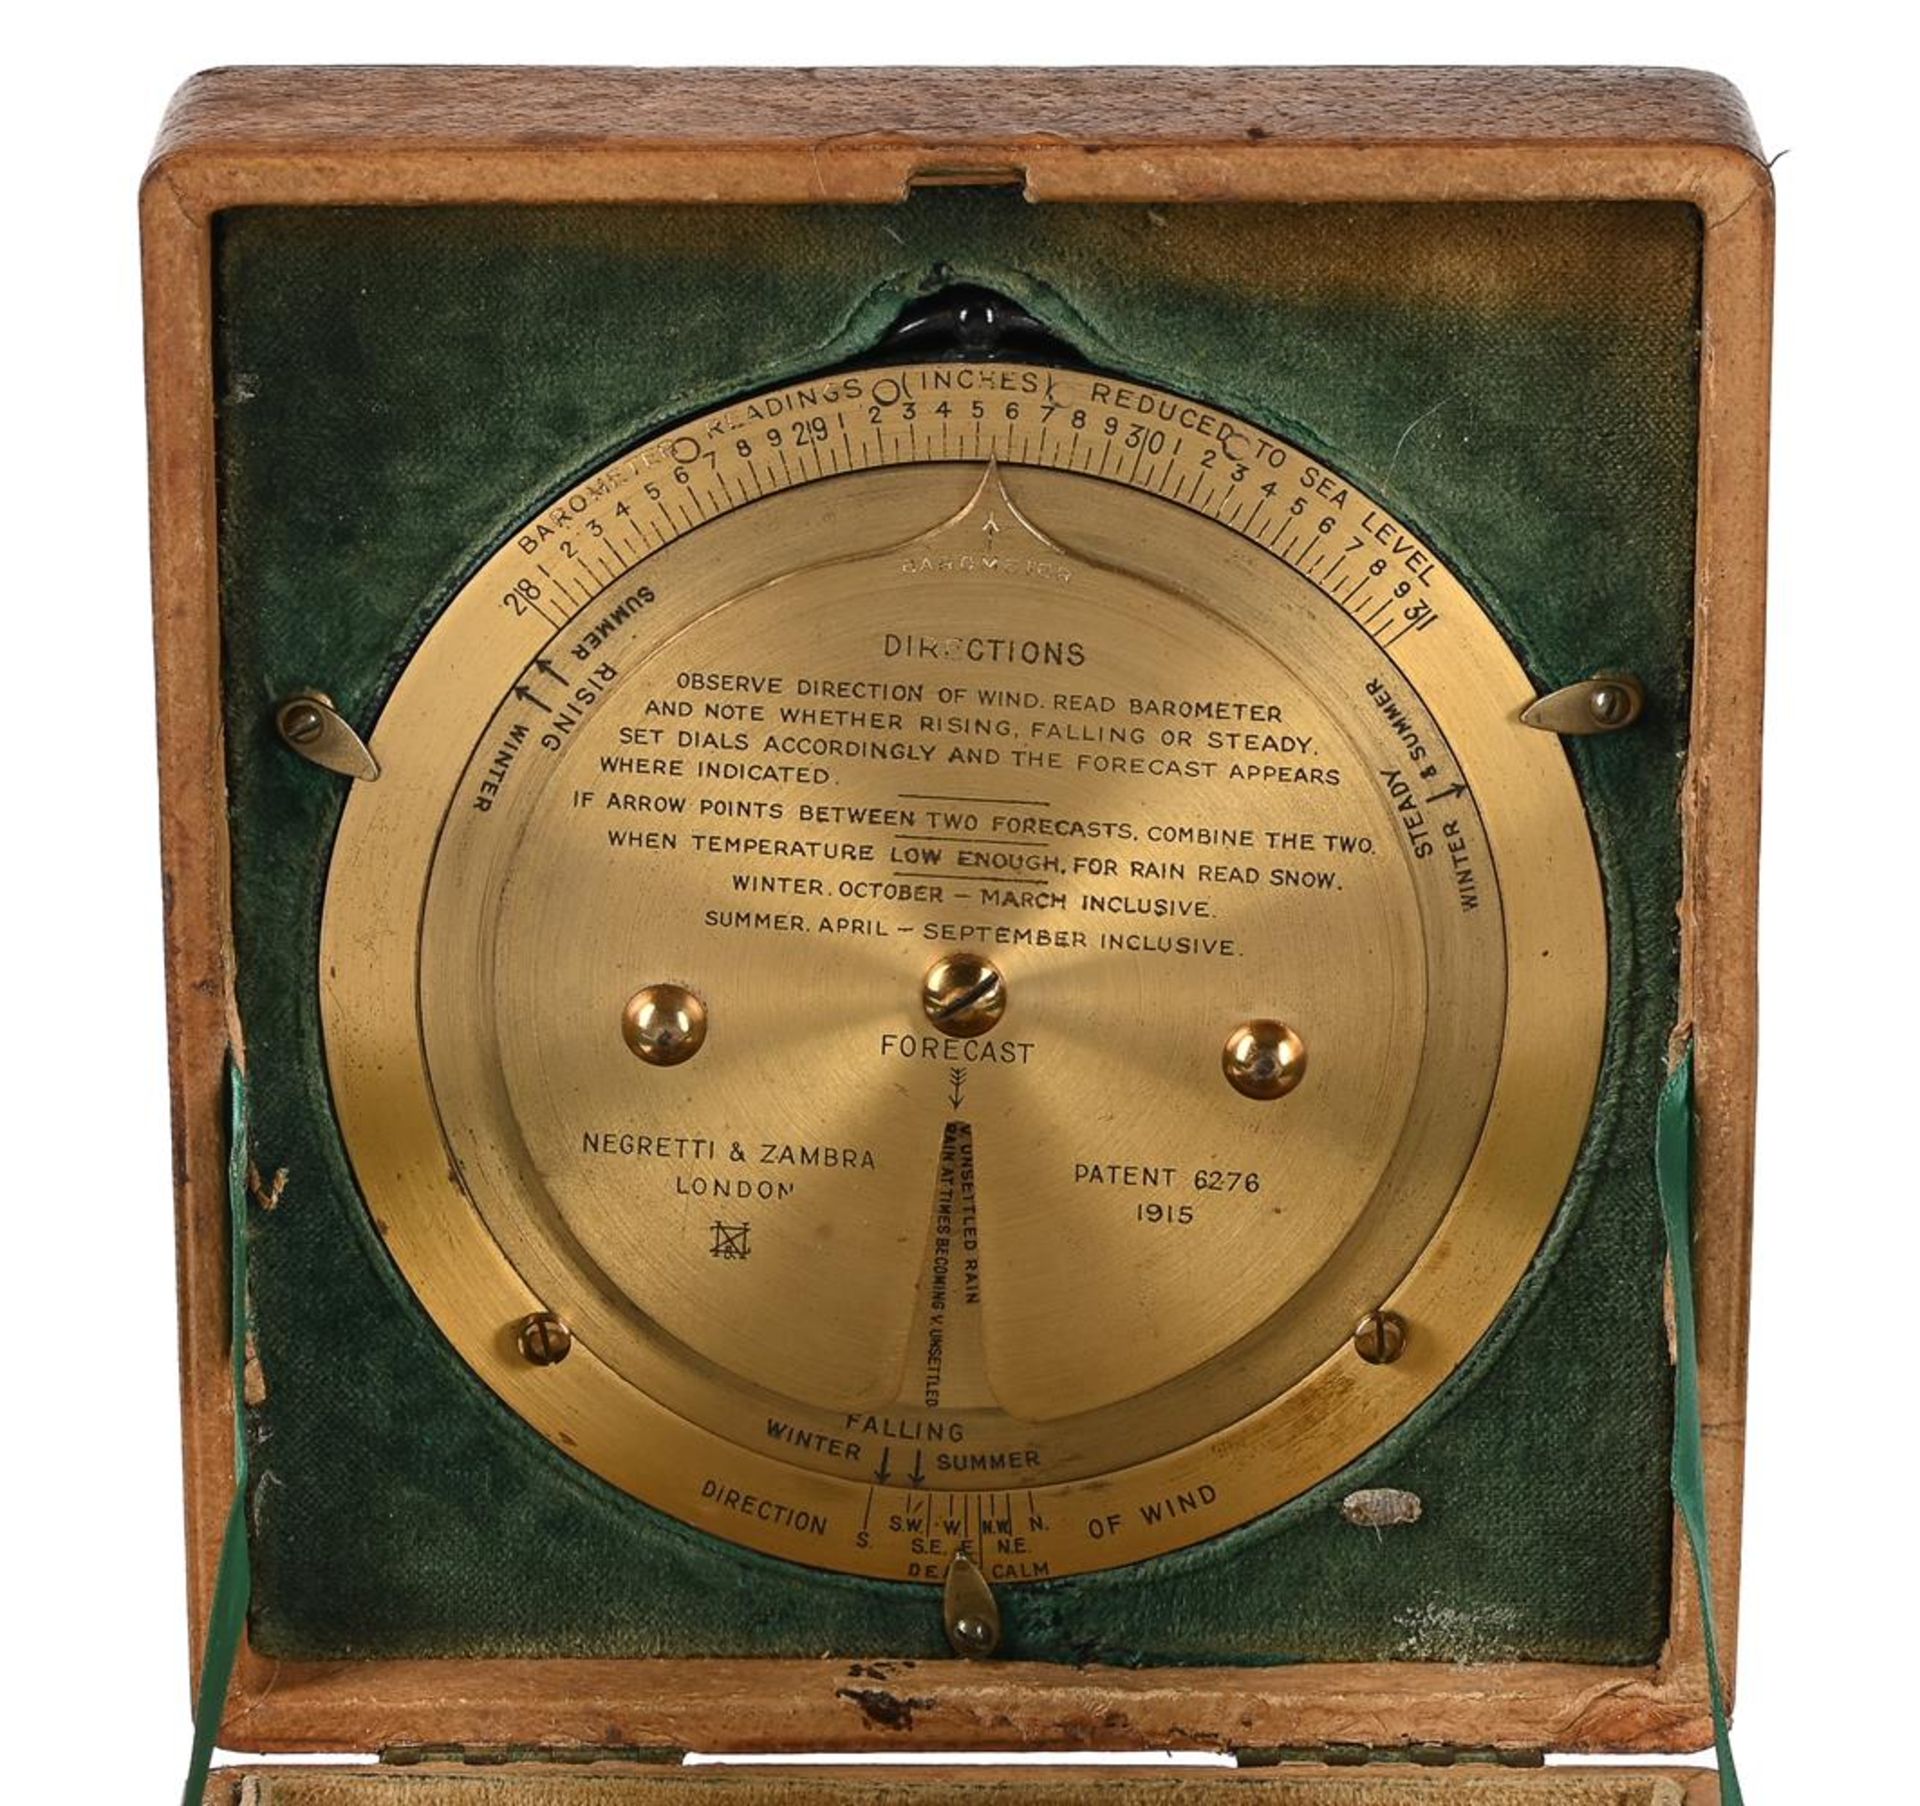 A CASED SET OF ANEROID FORECASTING BAROMETER AND LACQUERED BRASS WEATHER FORECASTING CALCULATOR - Image 2 of 7